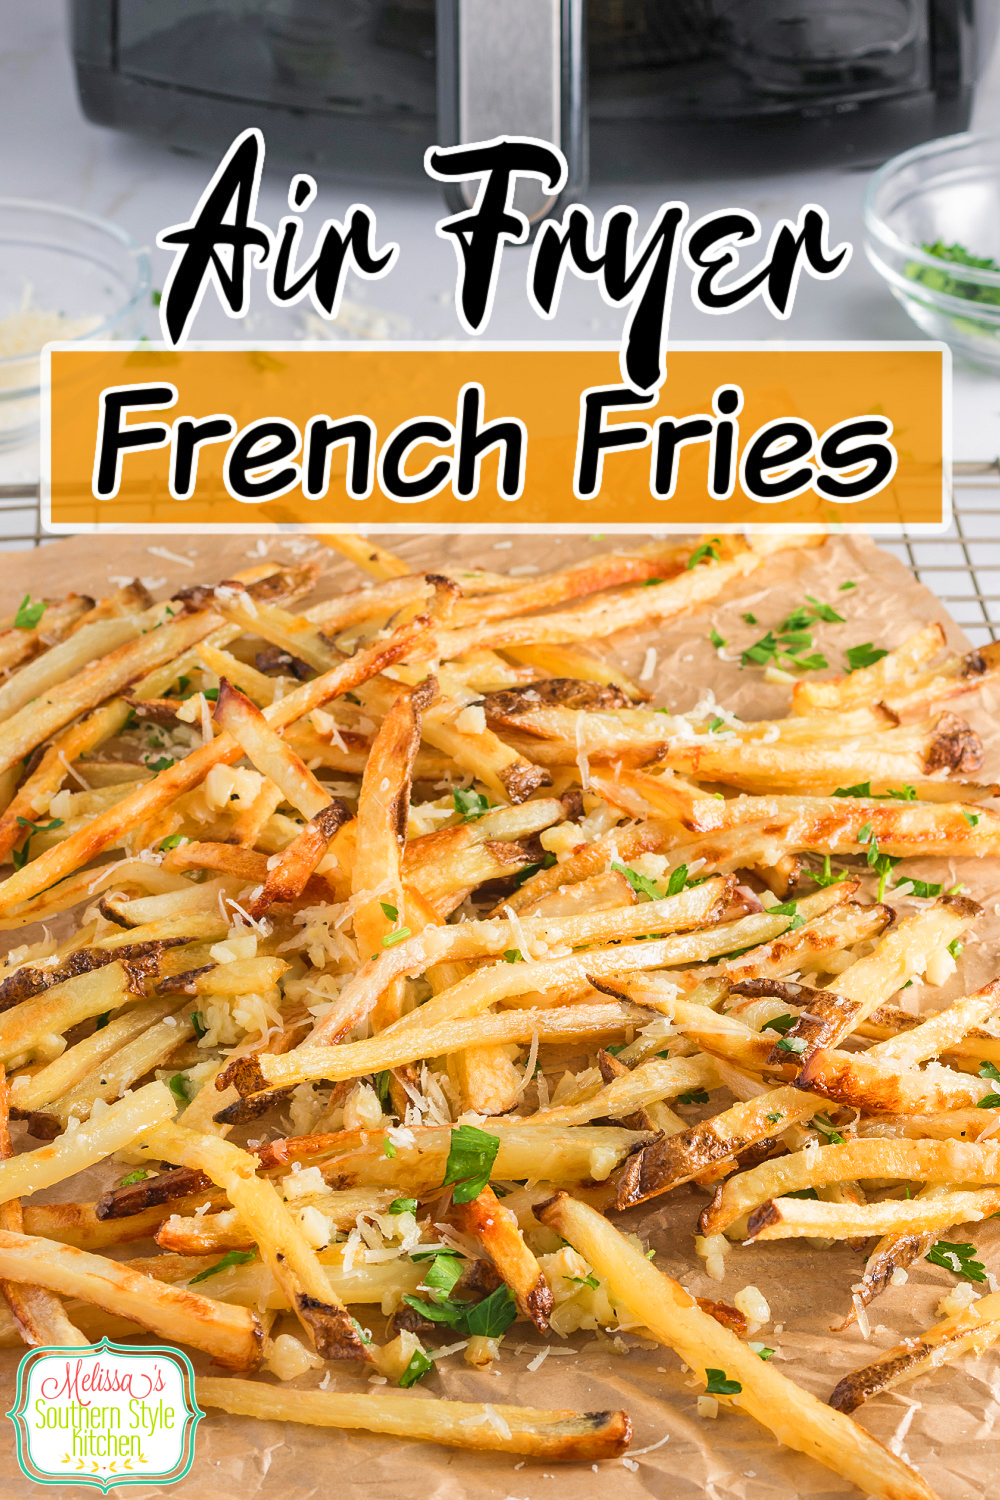 Enjoy these crisp Air Fryer French Fries as a quick and easy side dish. #easyfrenchfriesrecipe #frenchfries #airfryerrecipes #airfryerfries #homemadefrenchfries #airfriedfrenchfries via @melissasssk